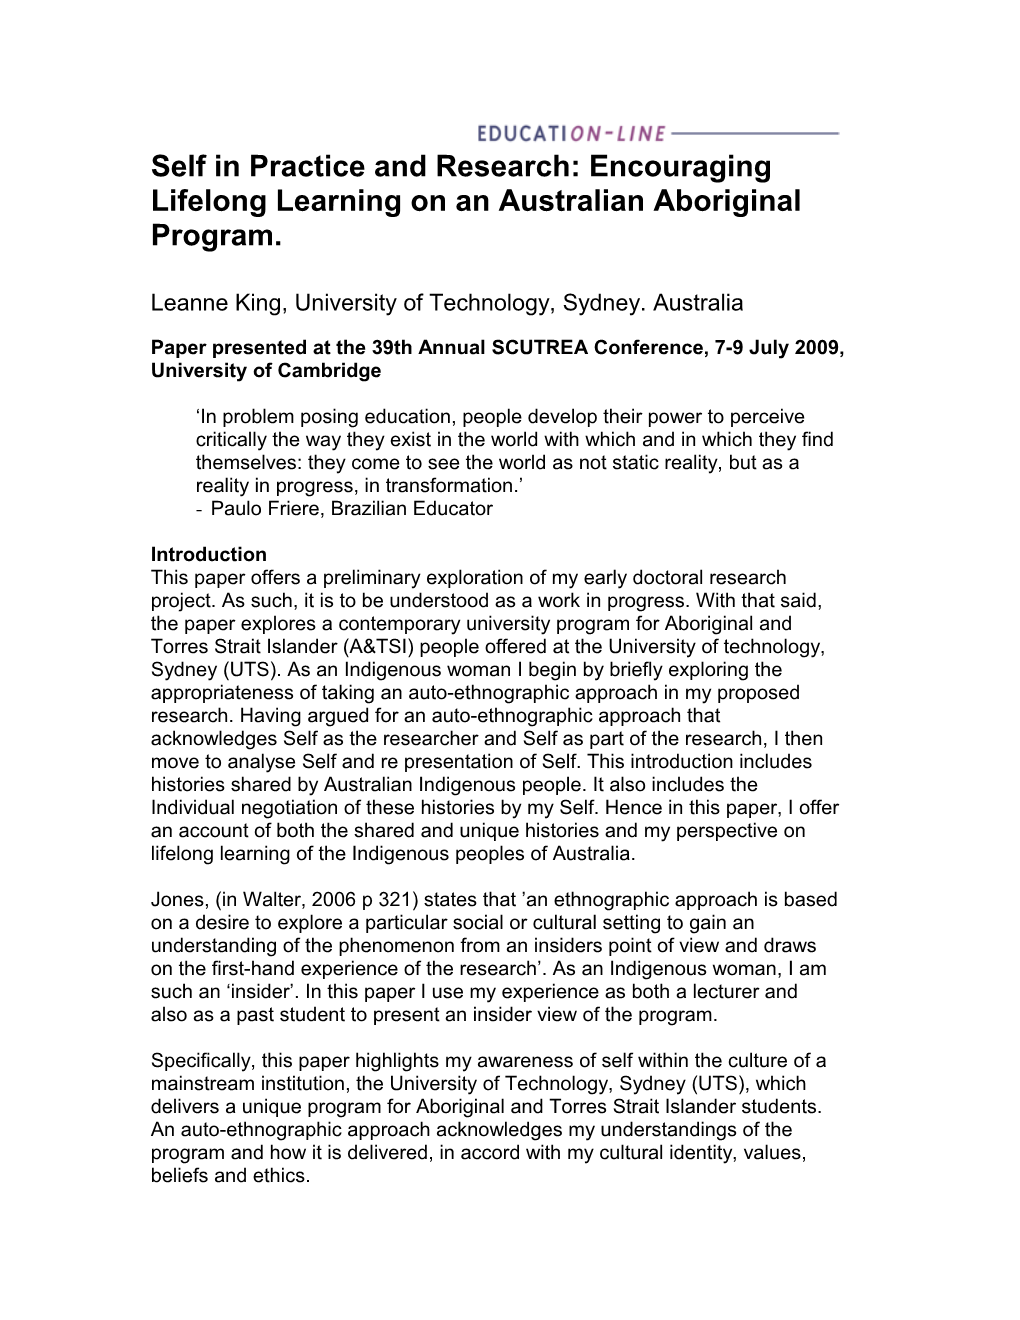 Self in Practice and Research: Encouraging Lifelong Learning on an Australian Aboriginal